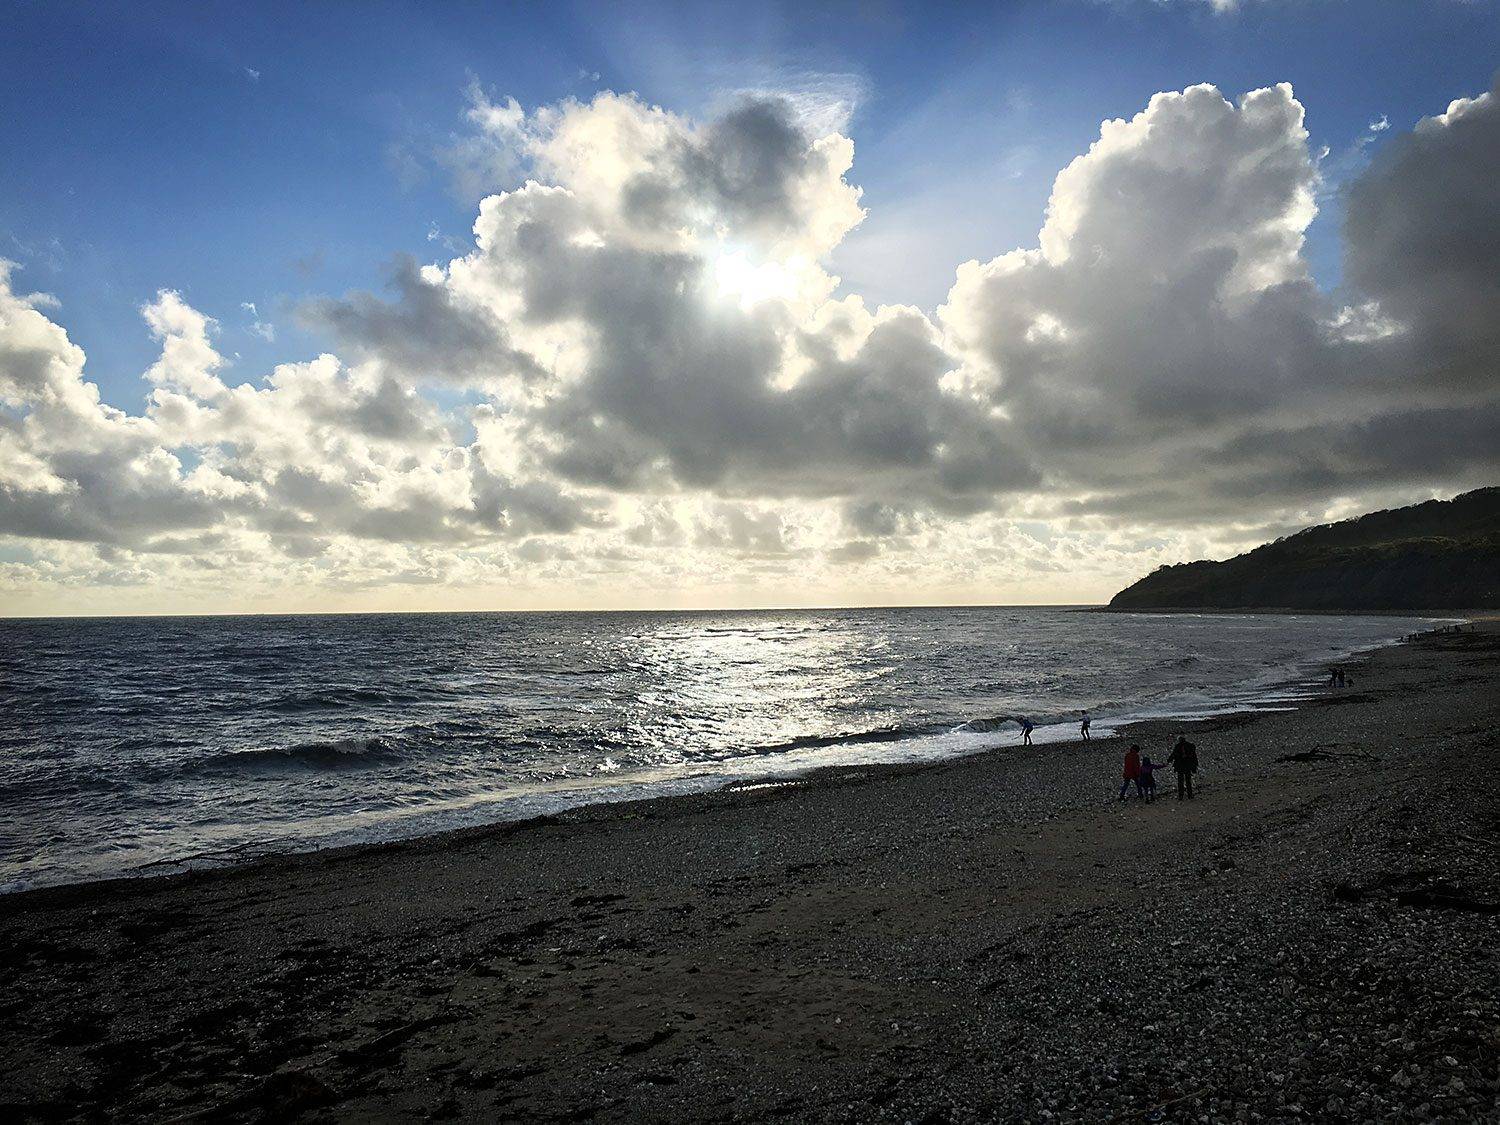 Late afternoon sun and clouds on the beach at Lyme Regis